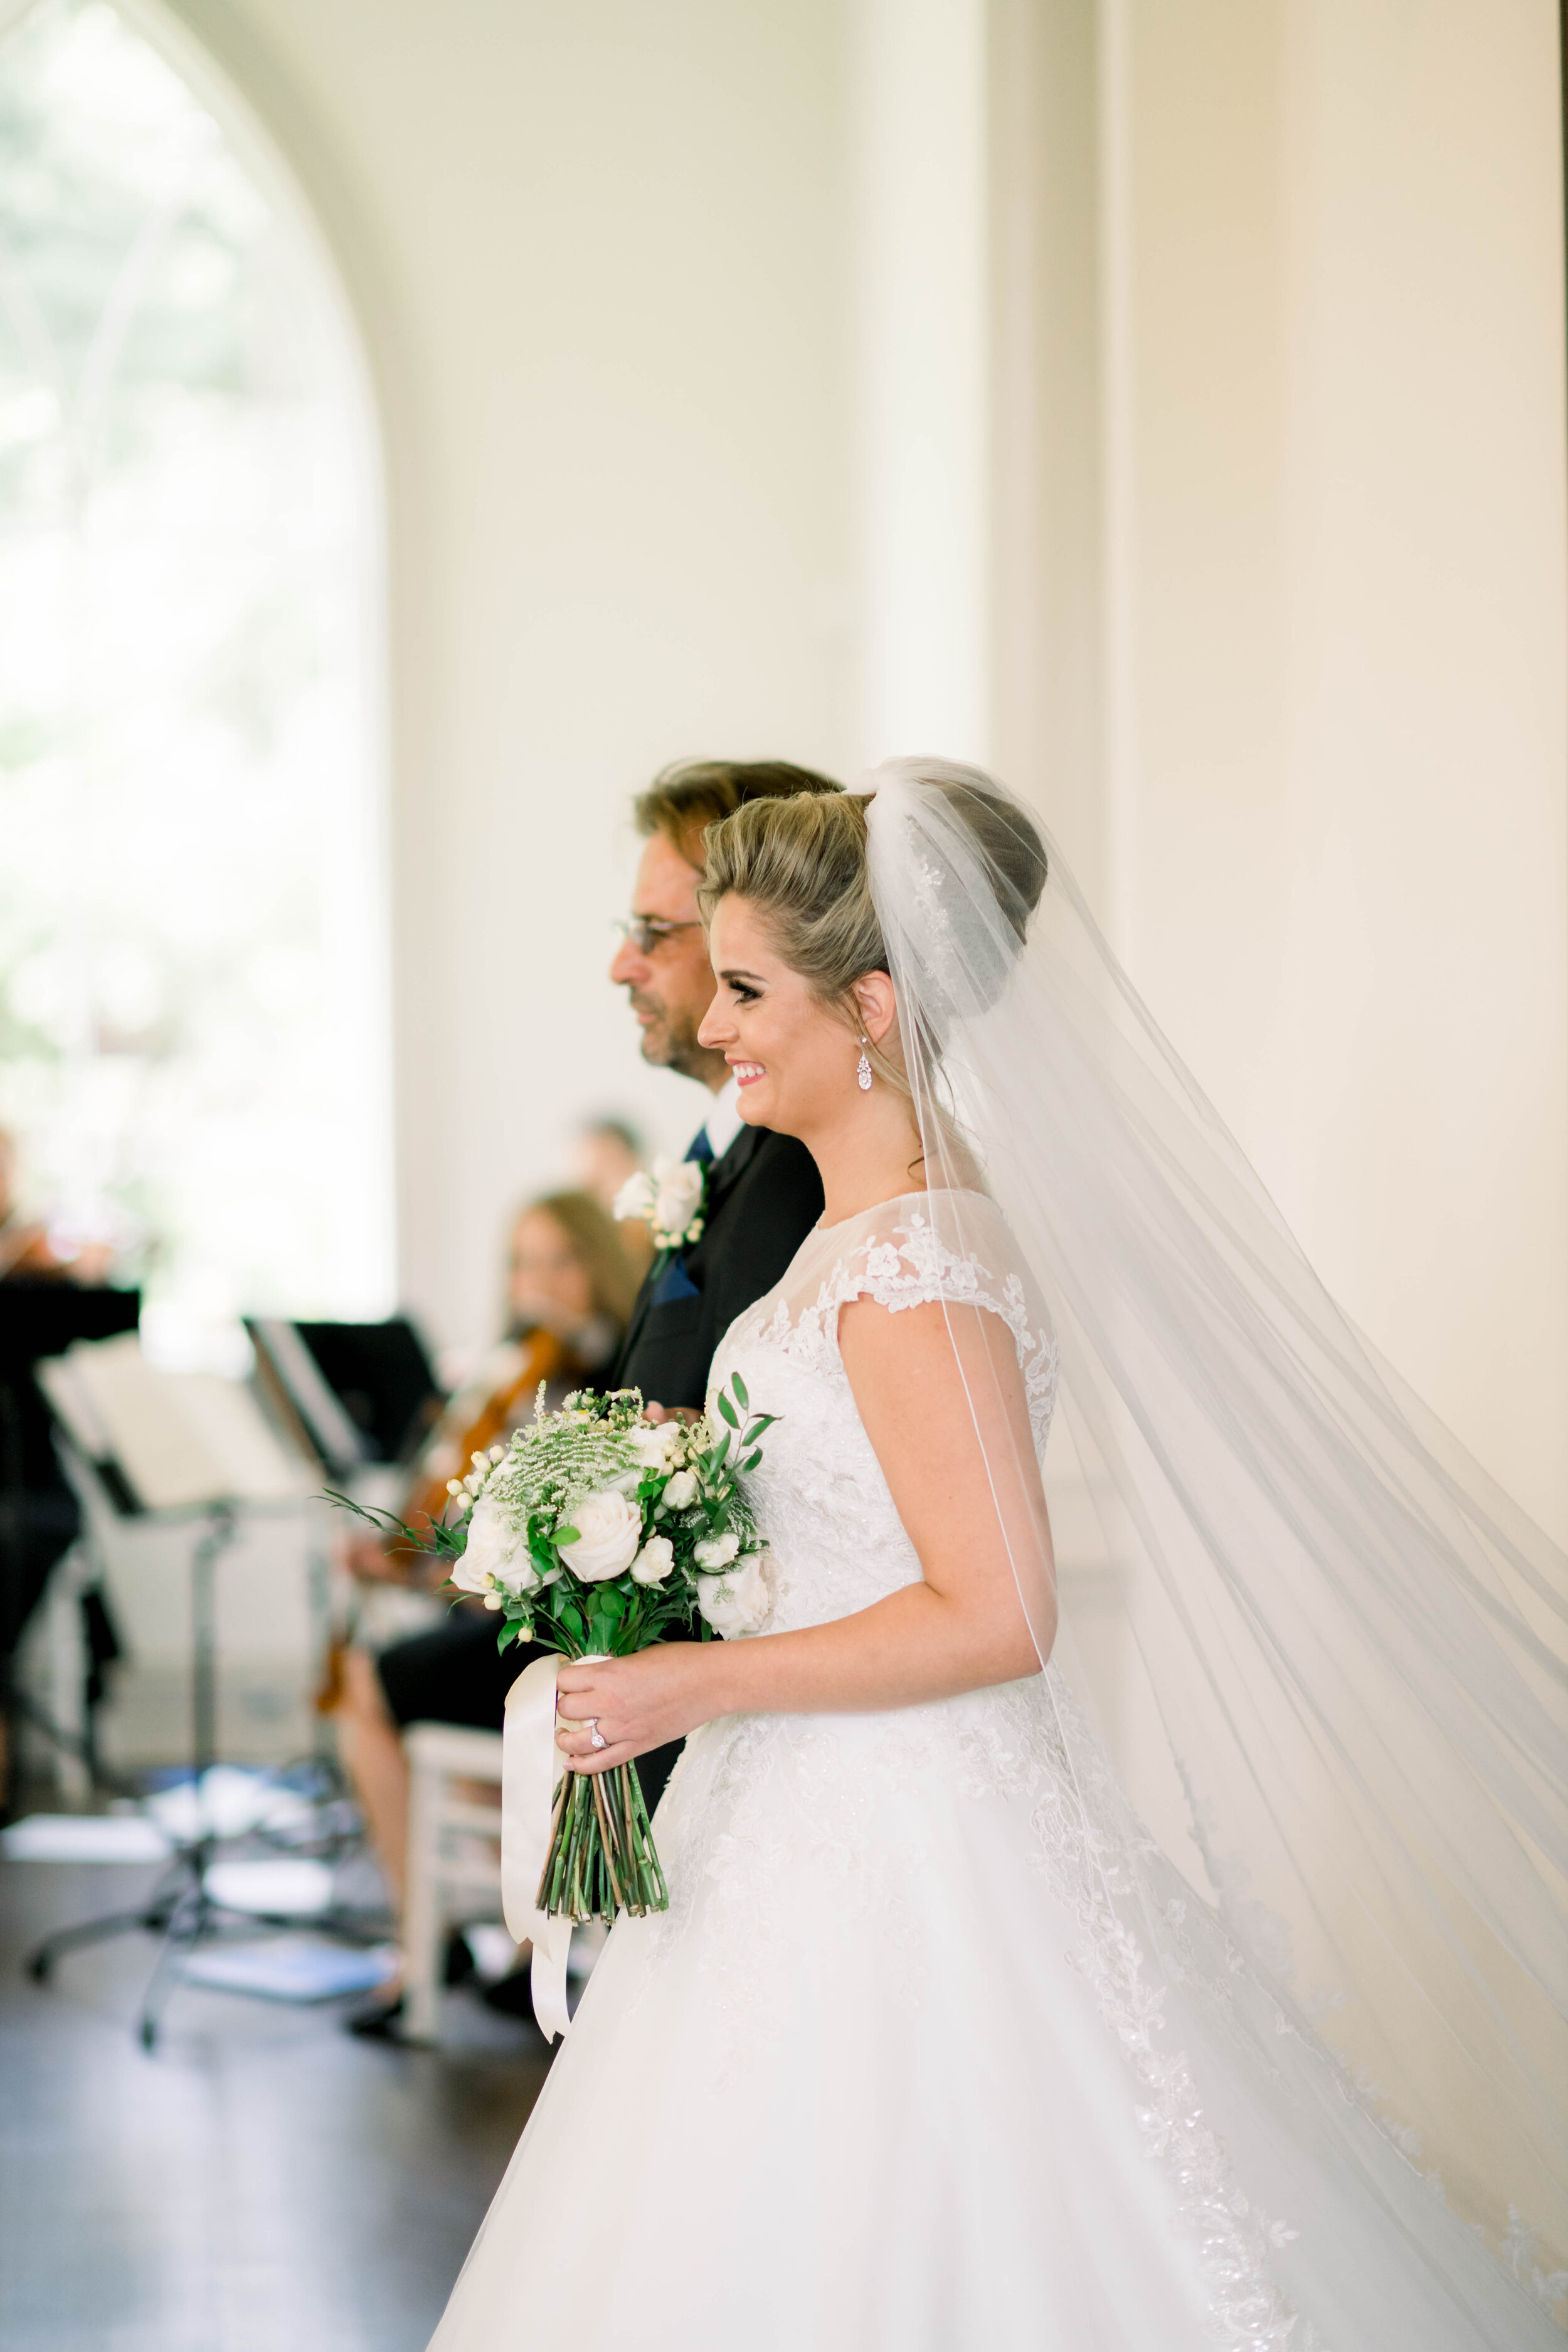 Luxury wedding at the Park Chateau in New Jersey with Slovic ceremony by Liz Andolina Photography